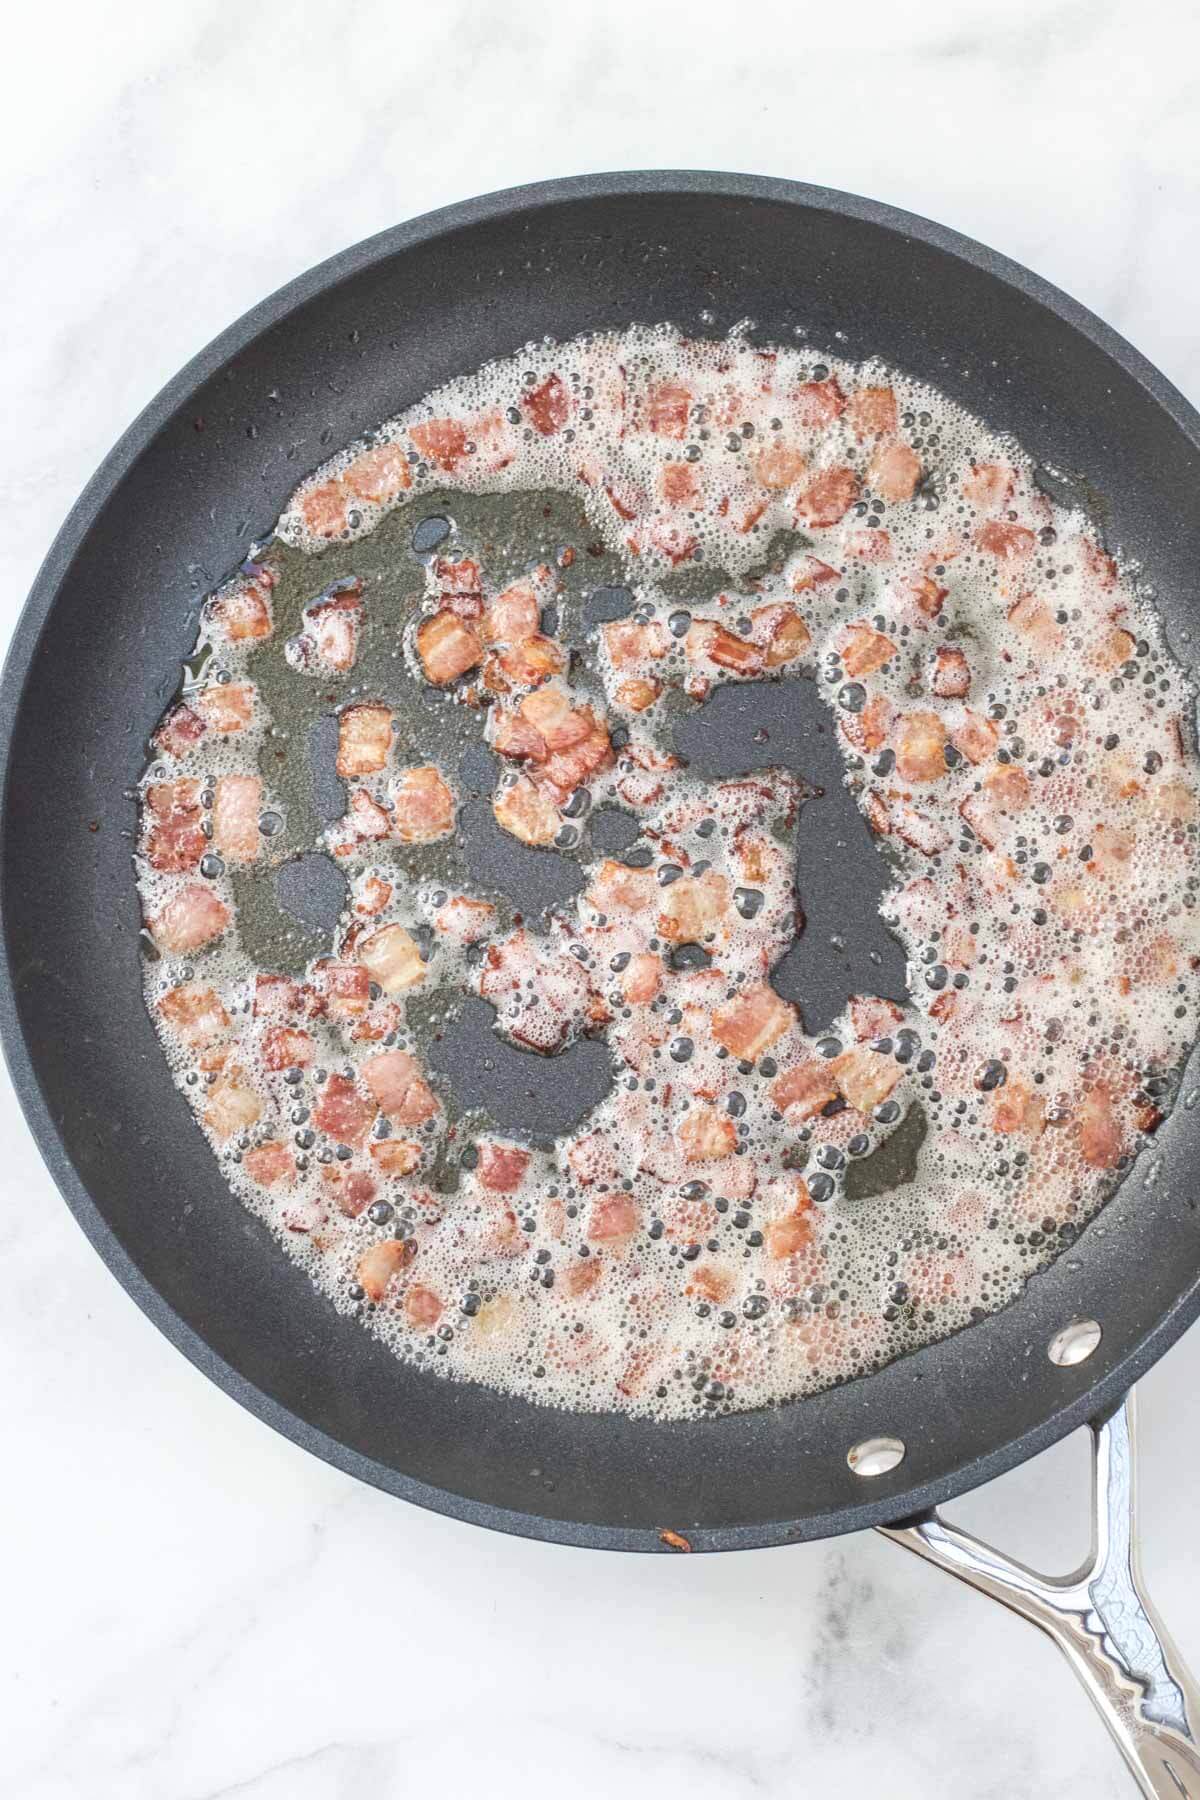 Bacon frying in a skillet. It has browned and realeased the bacon grease.